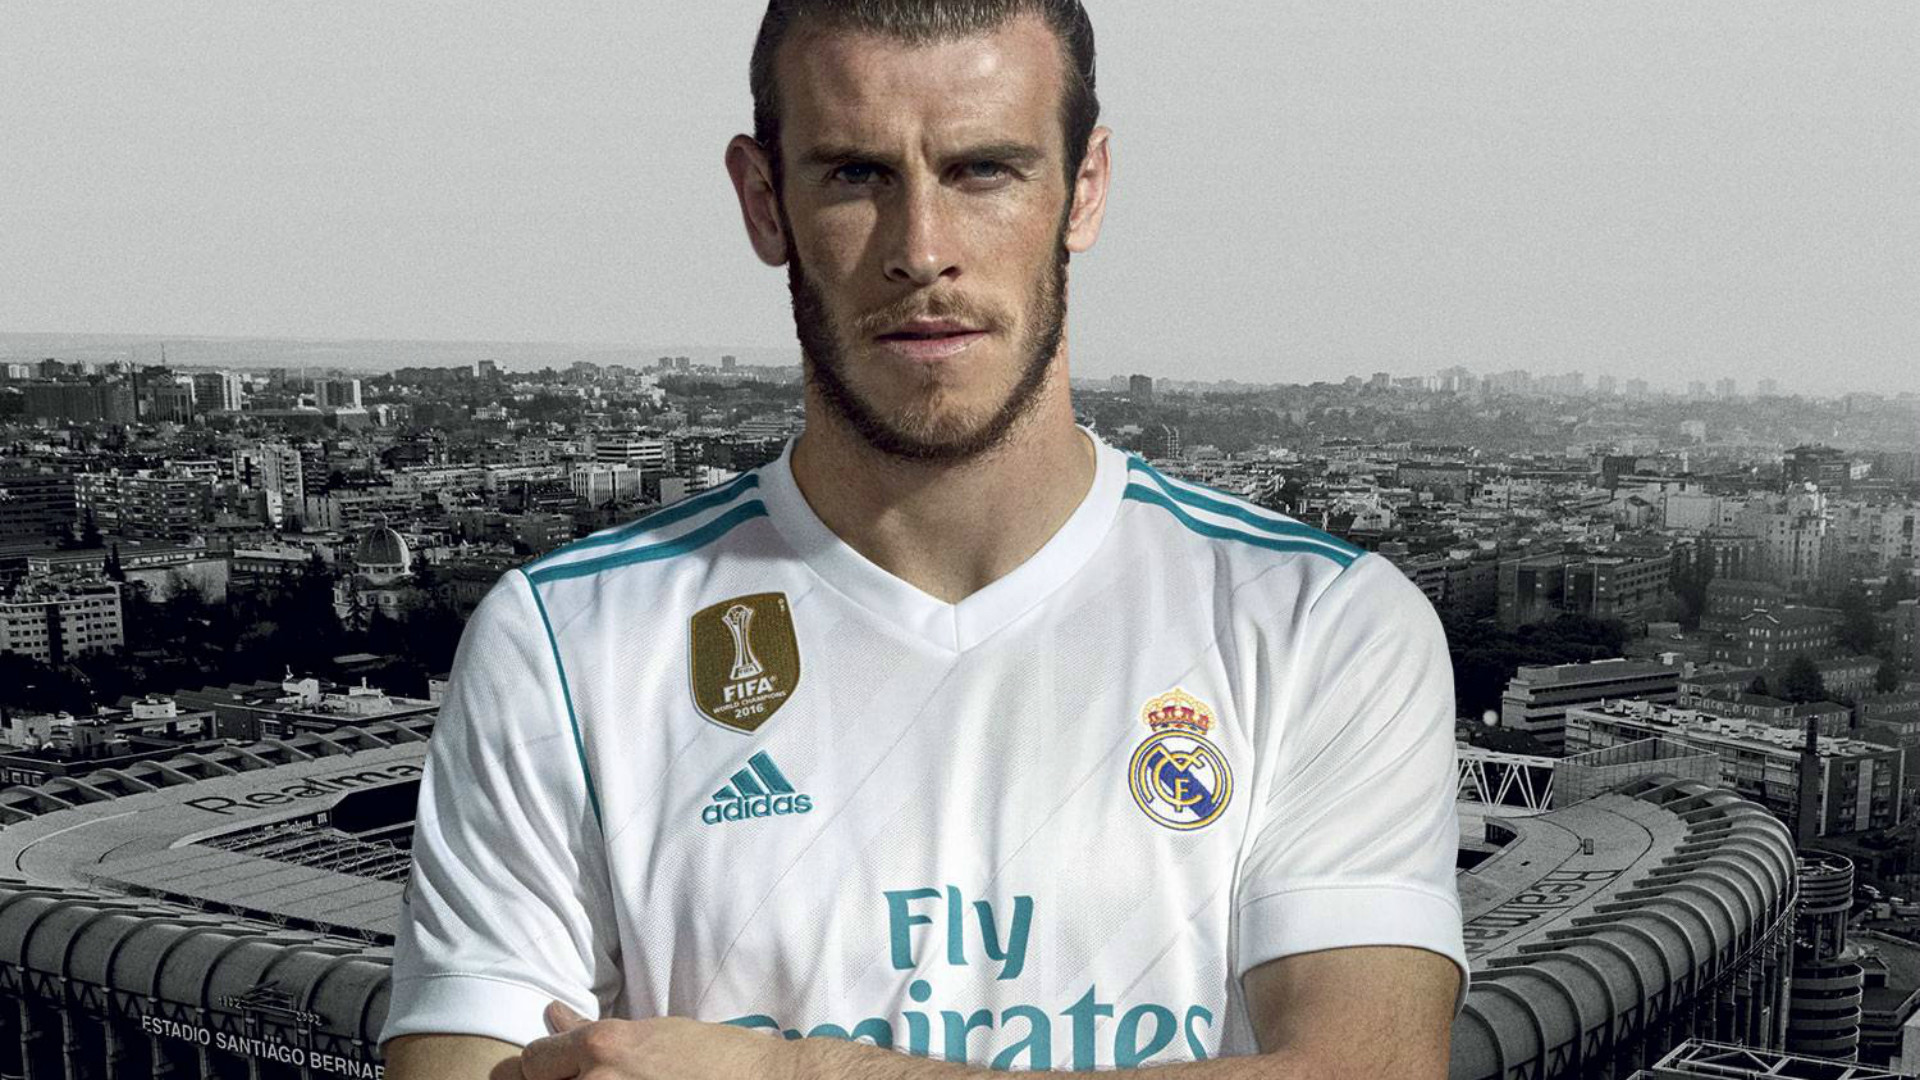 1920x1080 New Real Madrid Home Kit Download Gareth Bale HD Wallpaper from  WallpapersHDBackground